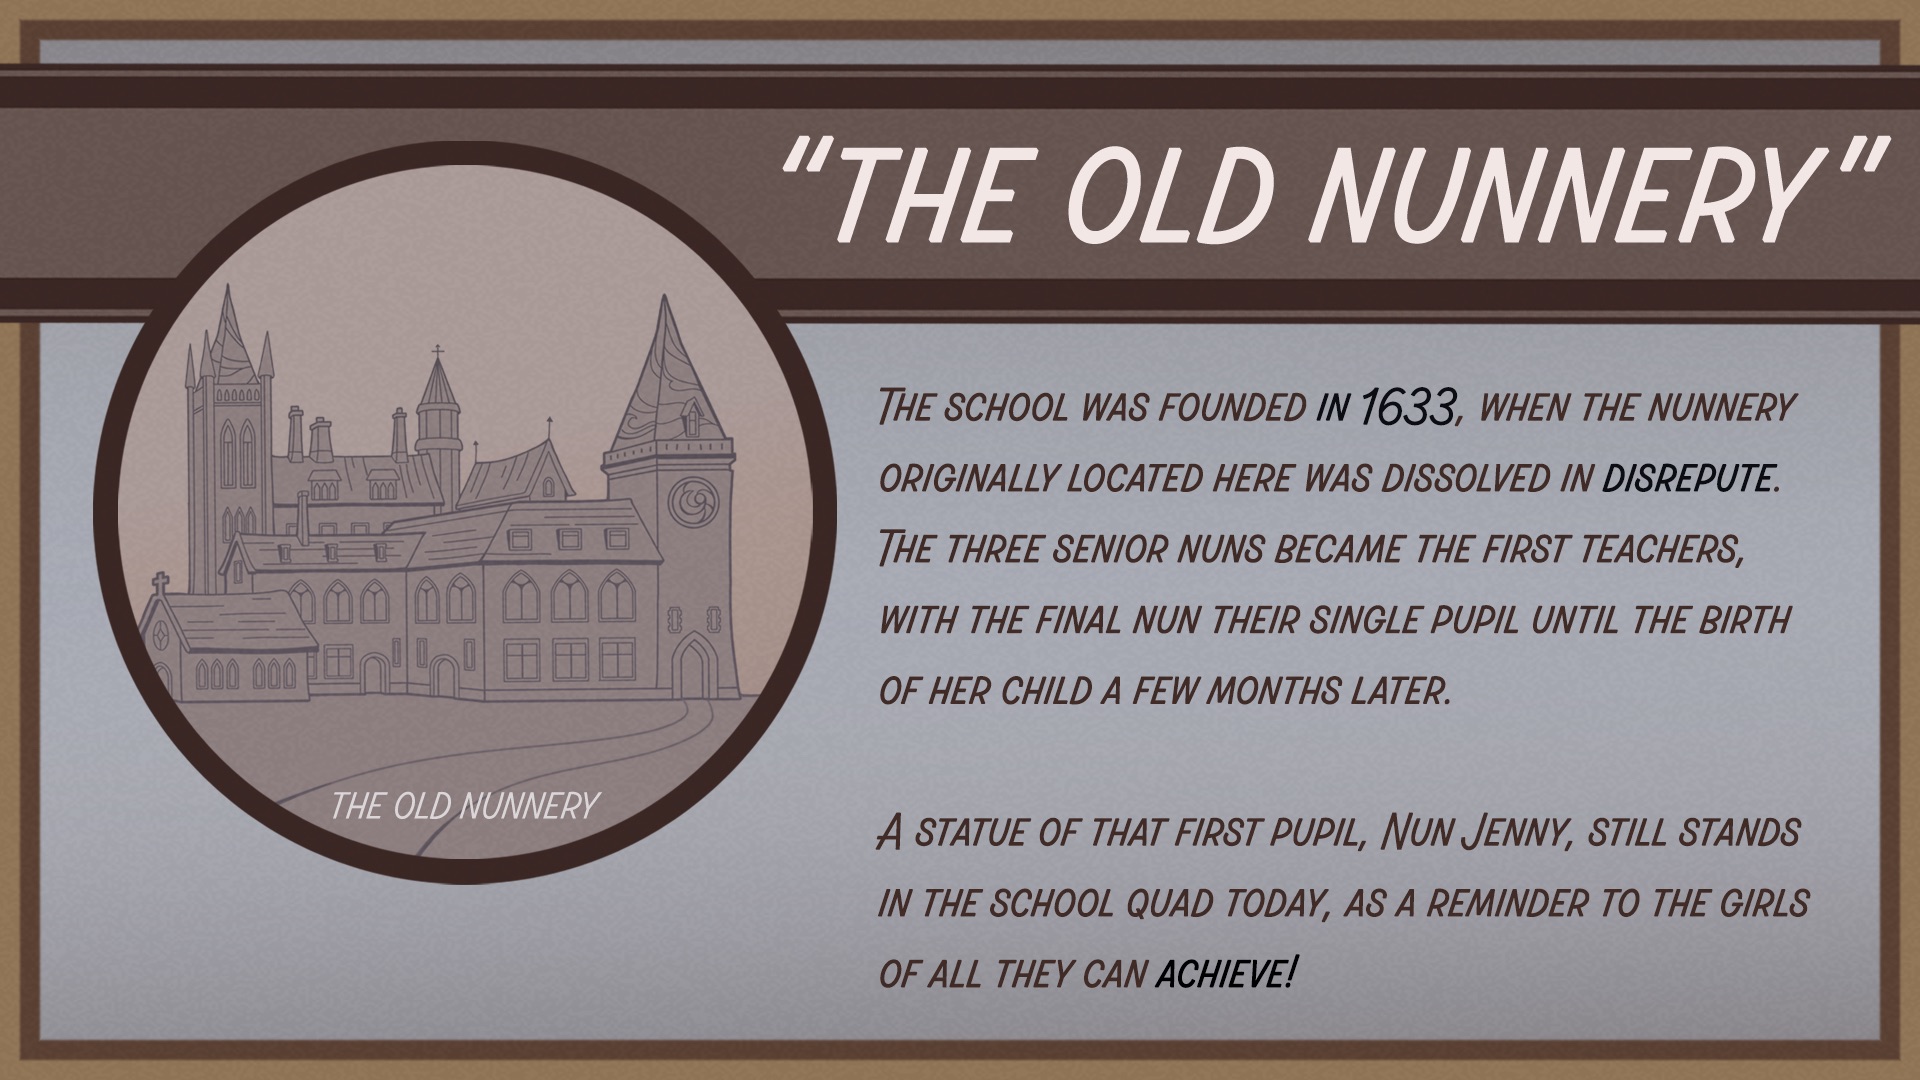 "The Old Nunnery"